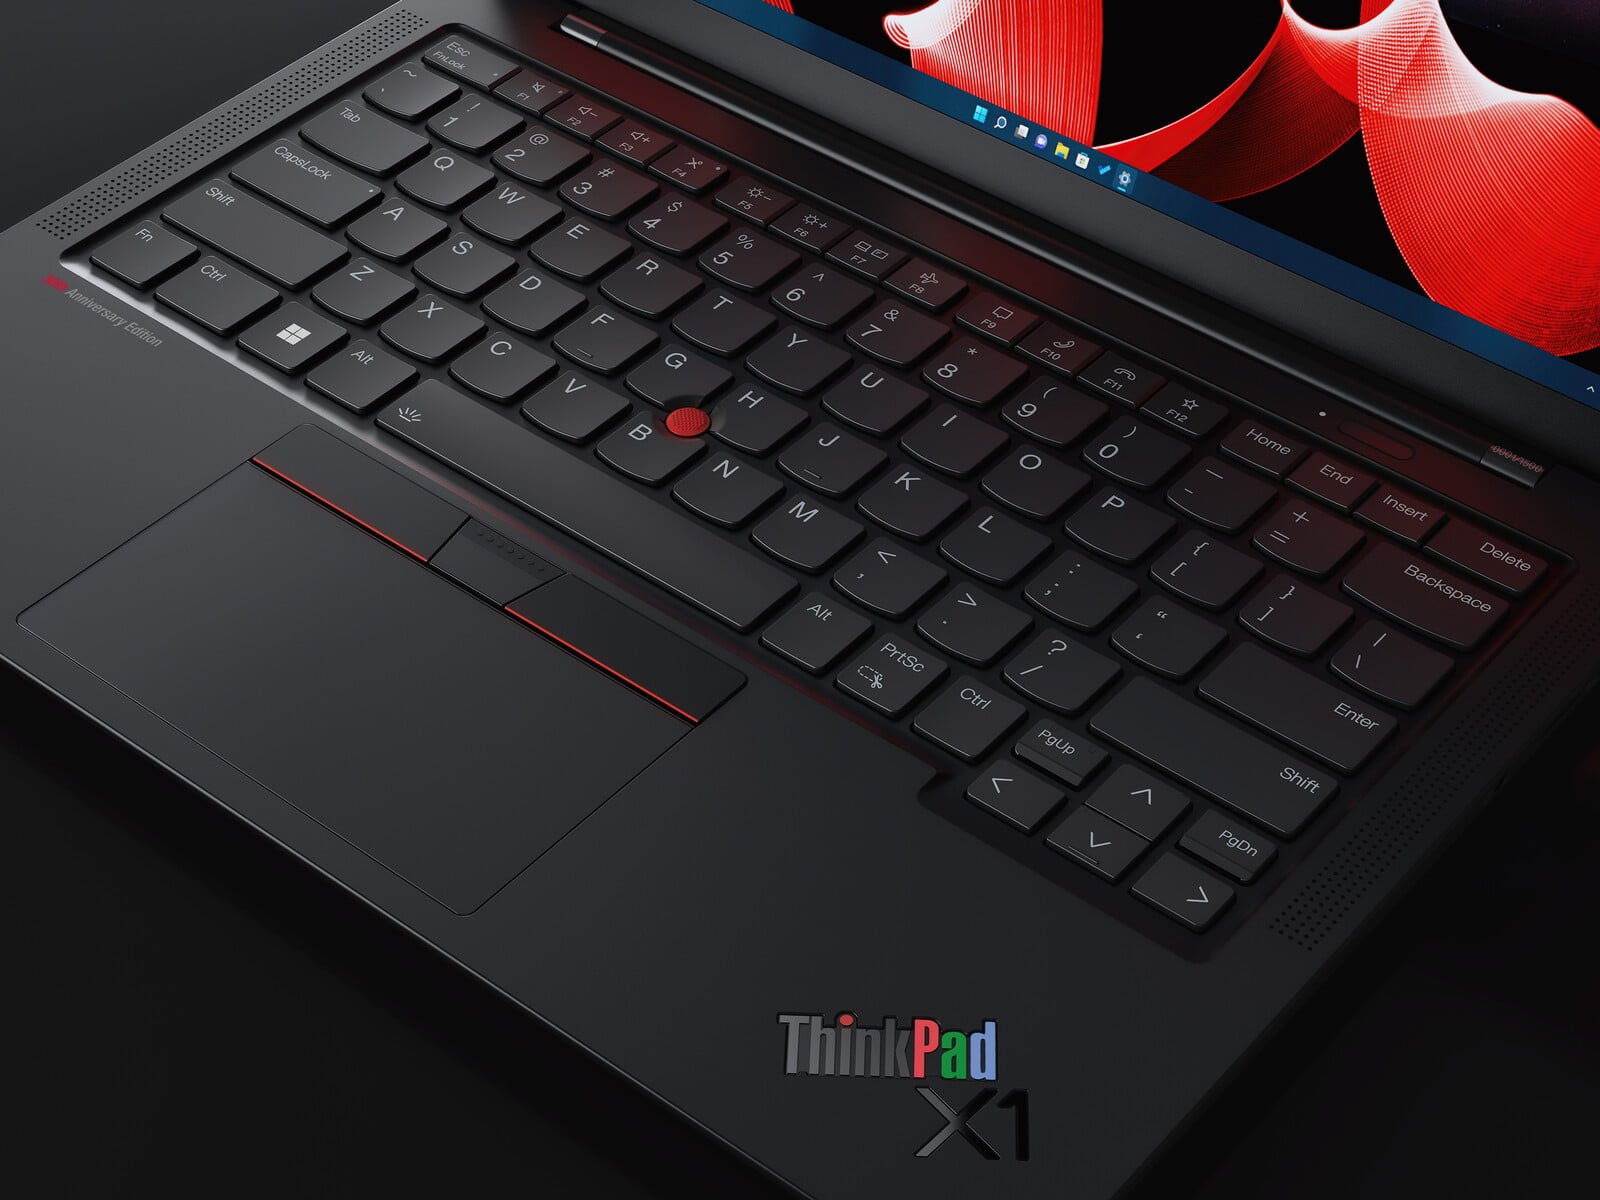 Lenovo Introduces the ThinkPad X1 Carbon 30th Anniversary Edition, Complete With Impressive Hardware